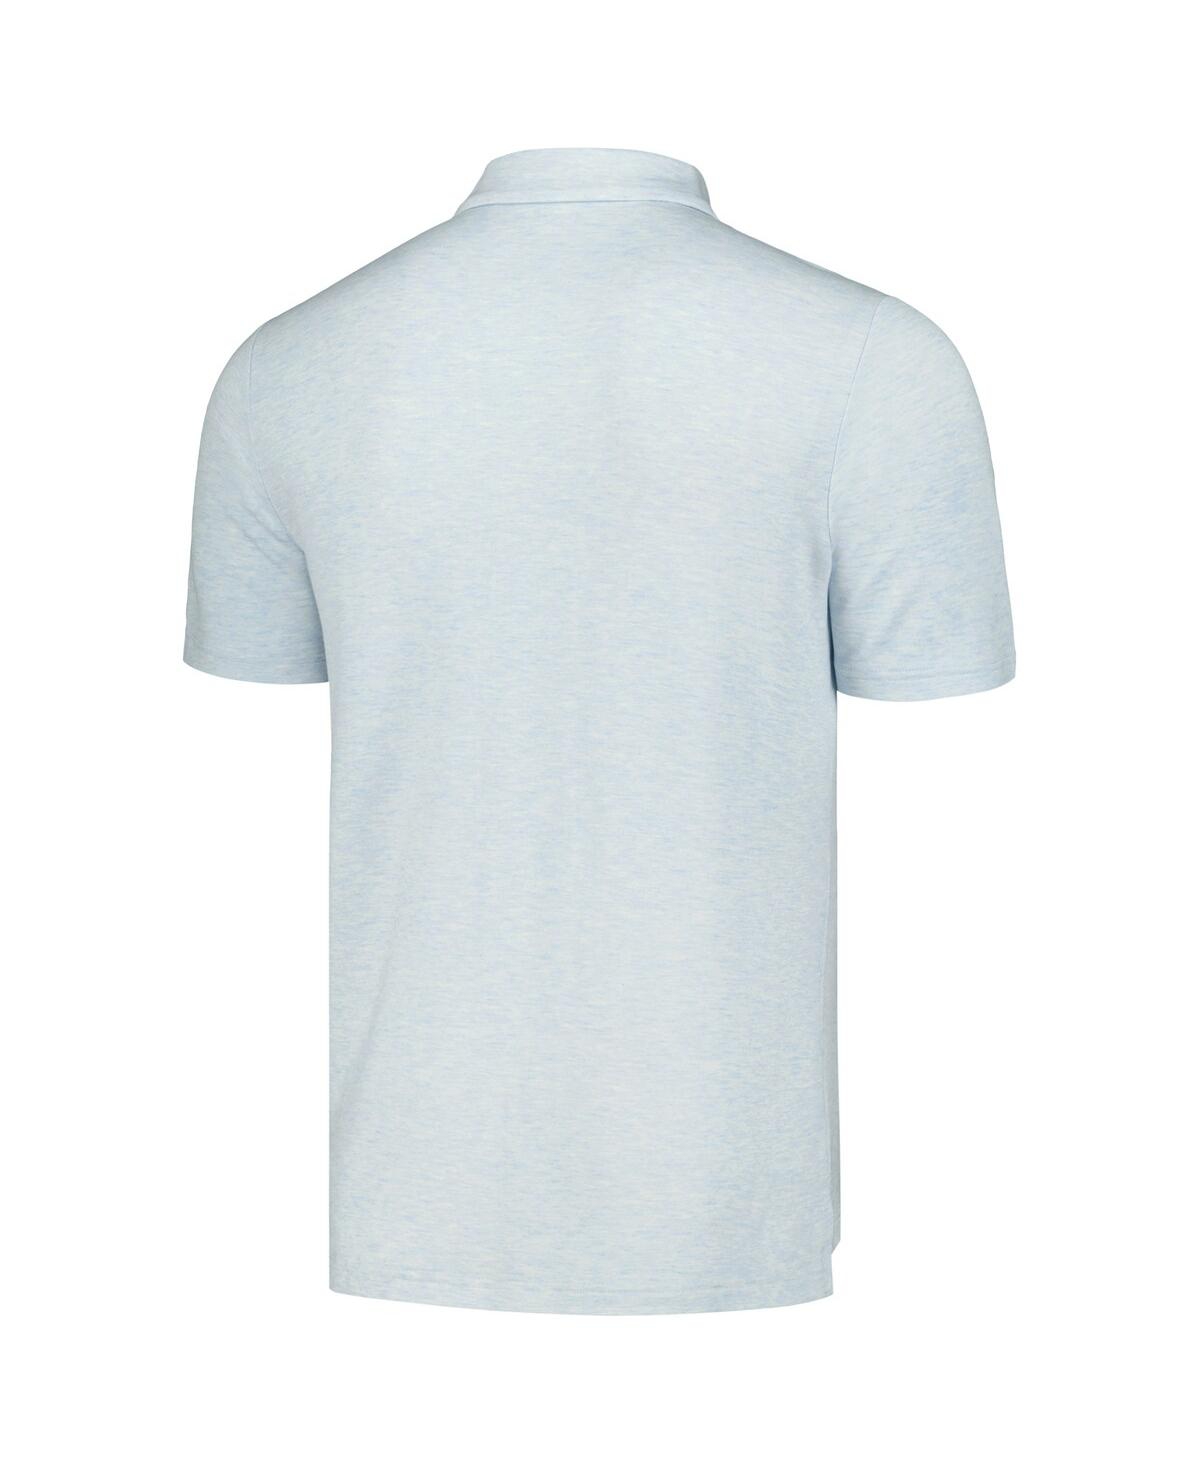 Shop Columbia Men's Light Blue The Players Omni-shade Clubhead Polo